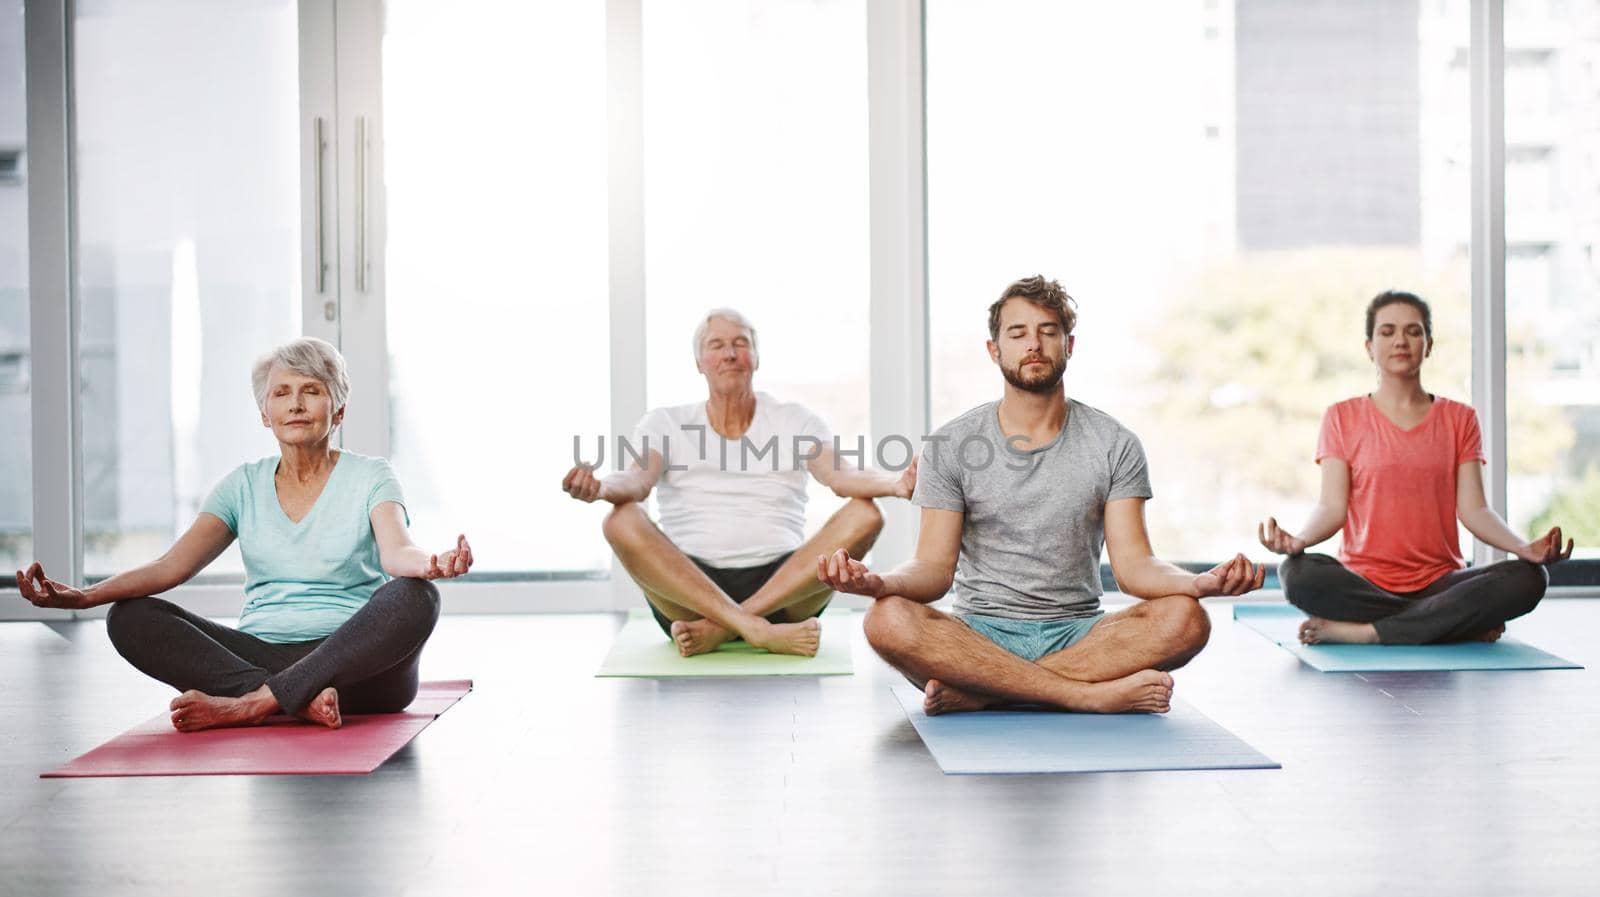 Full length shot of a group of people meditating while practicing yoga.